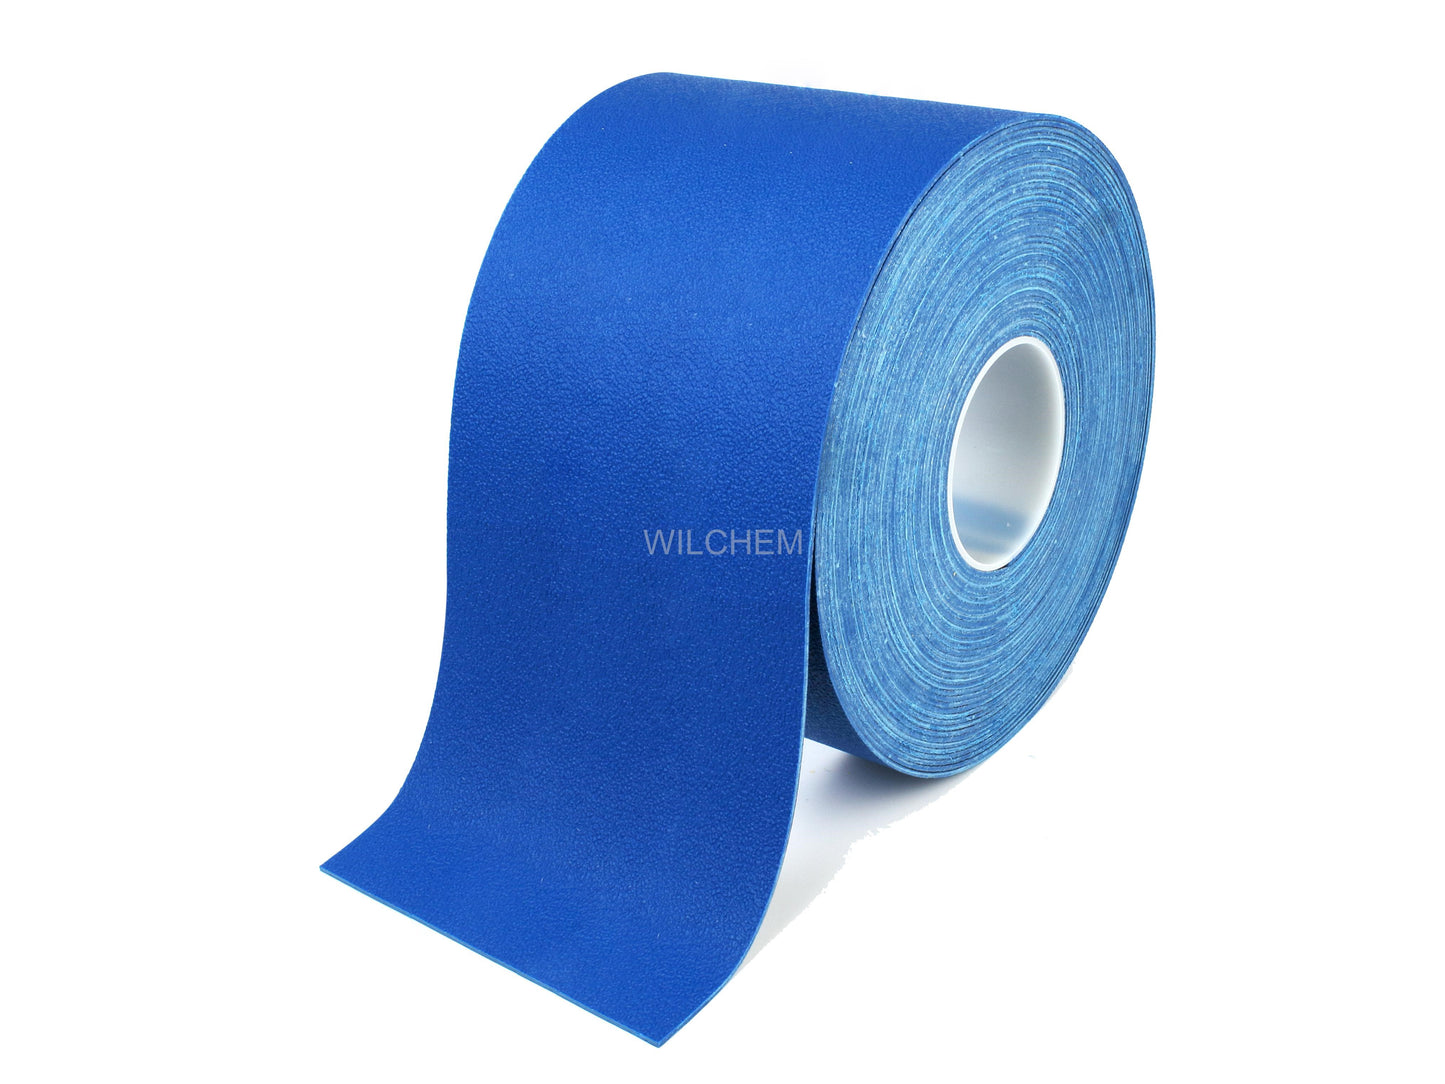 THICK COARSE RESILIENT TAPE